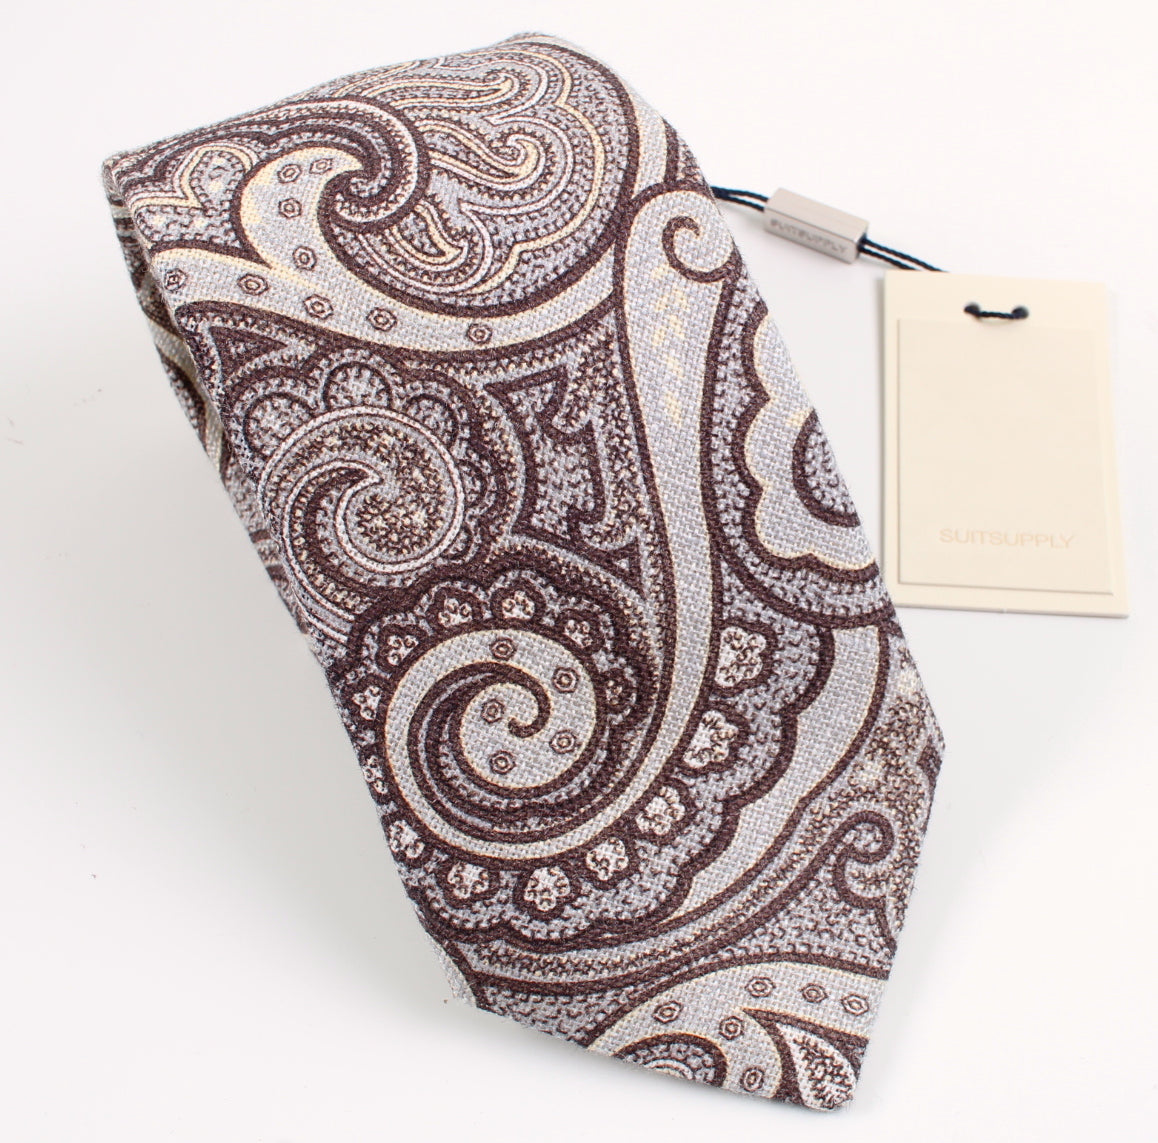 New With Tags SUITSUPPLY Brown Paisley 100% Linen Tie